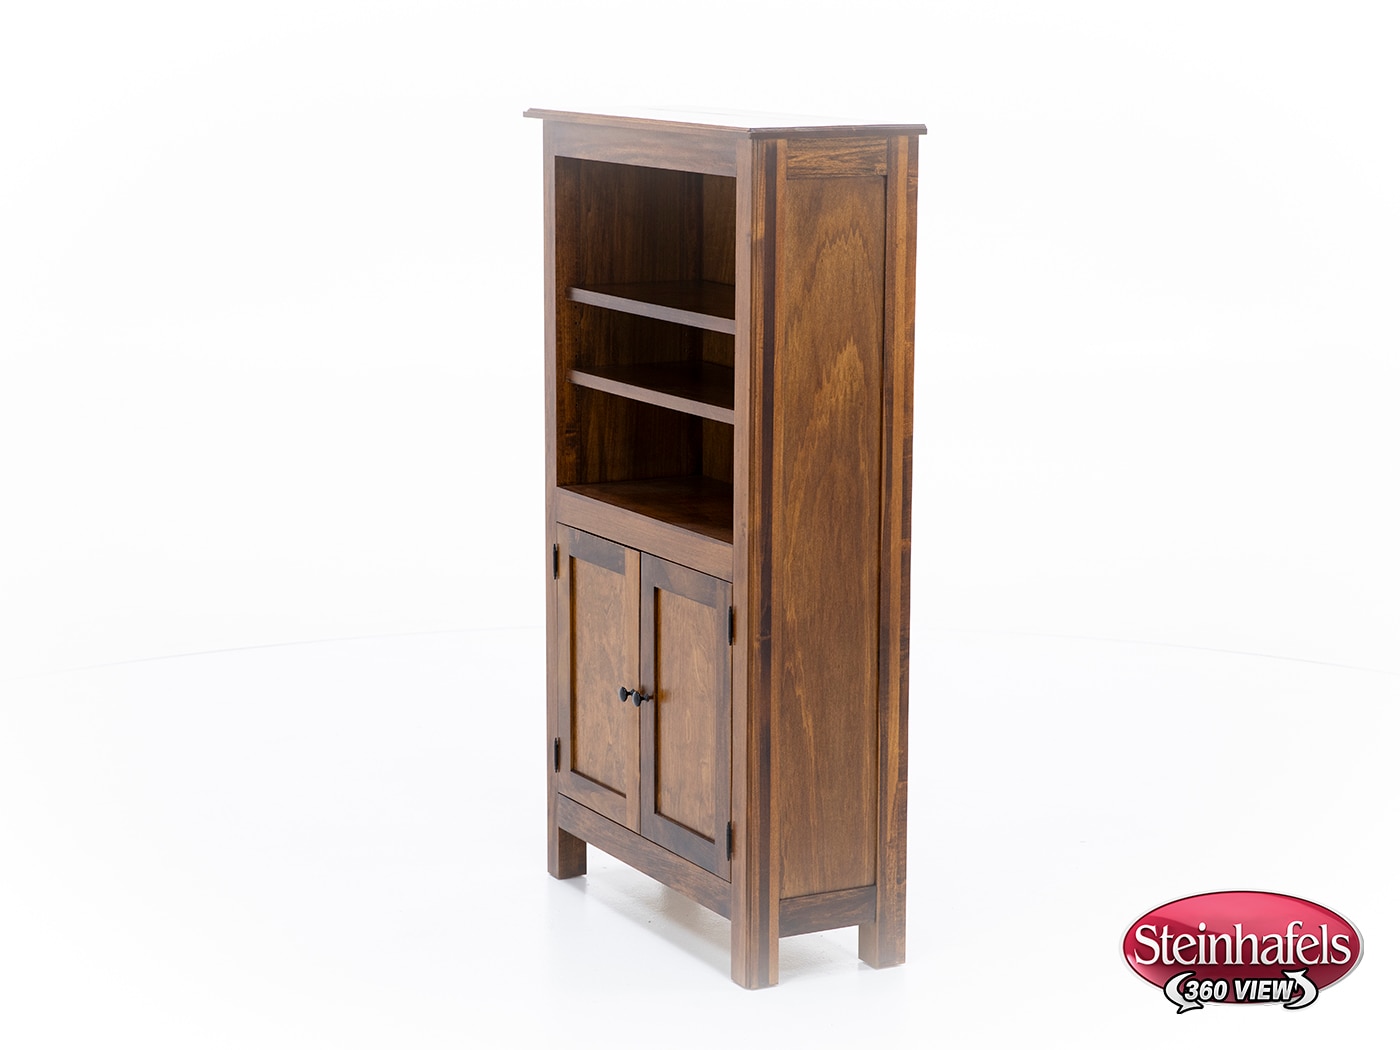 witmer furniture brown bookcase  image tylr  